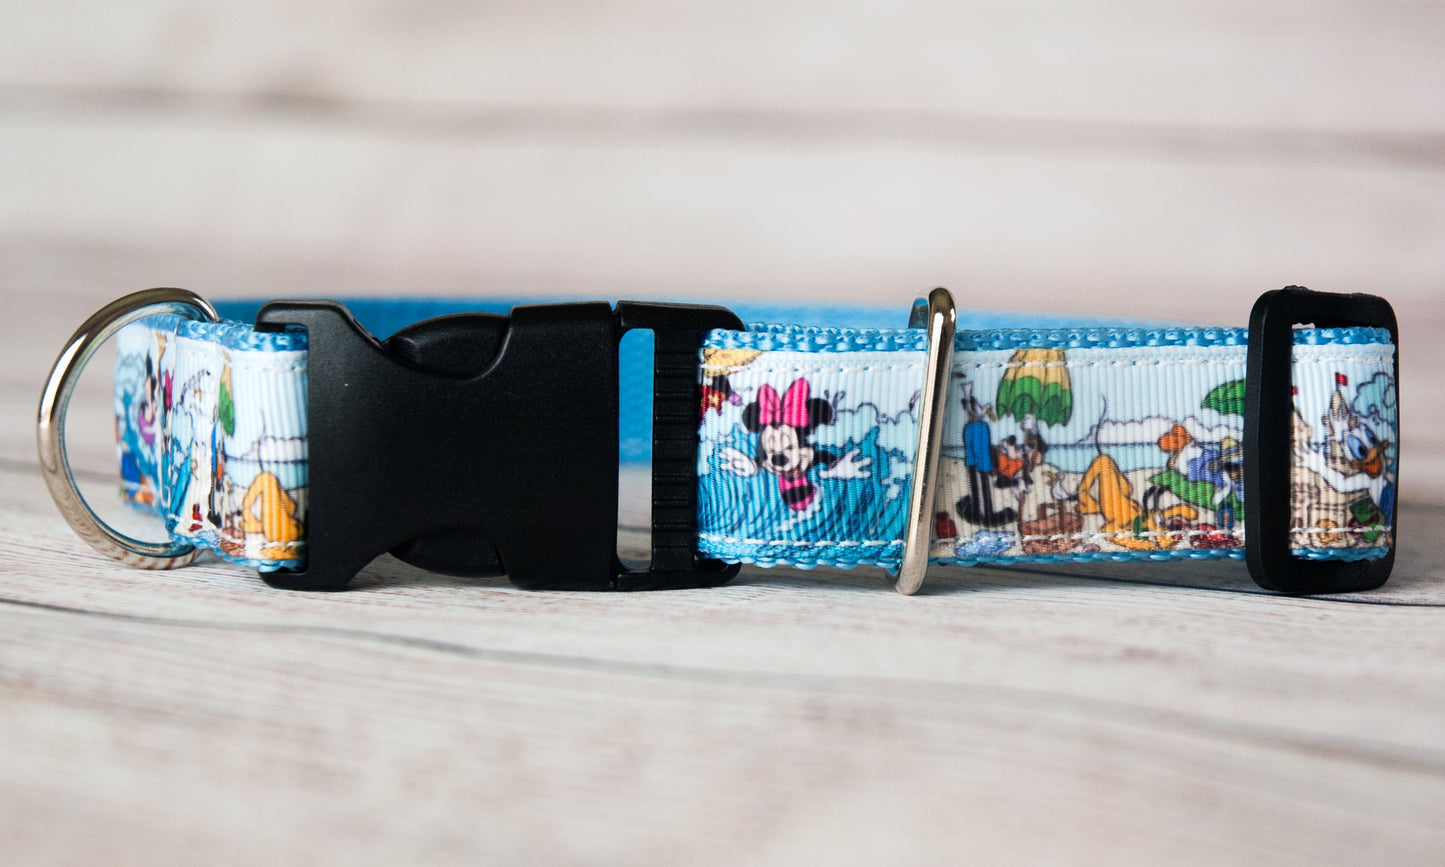 Mouse characters at the beach dog collar and/or leash